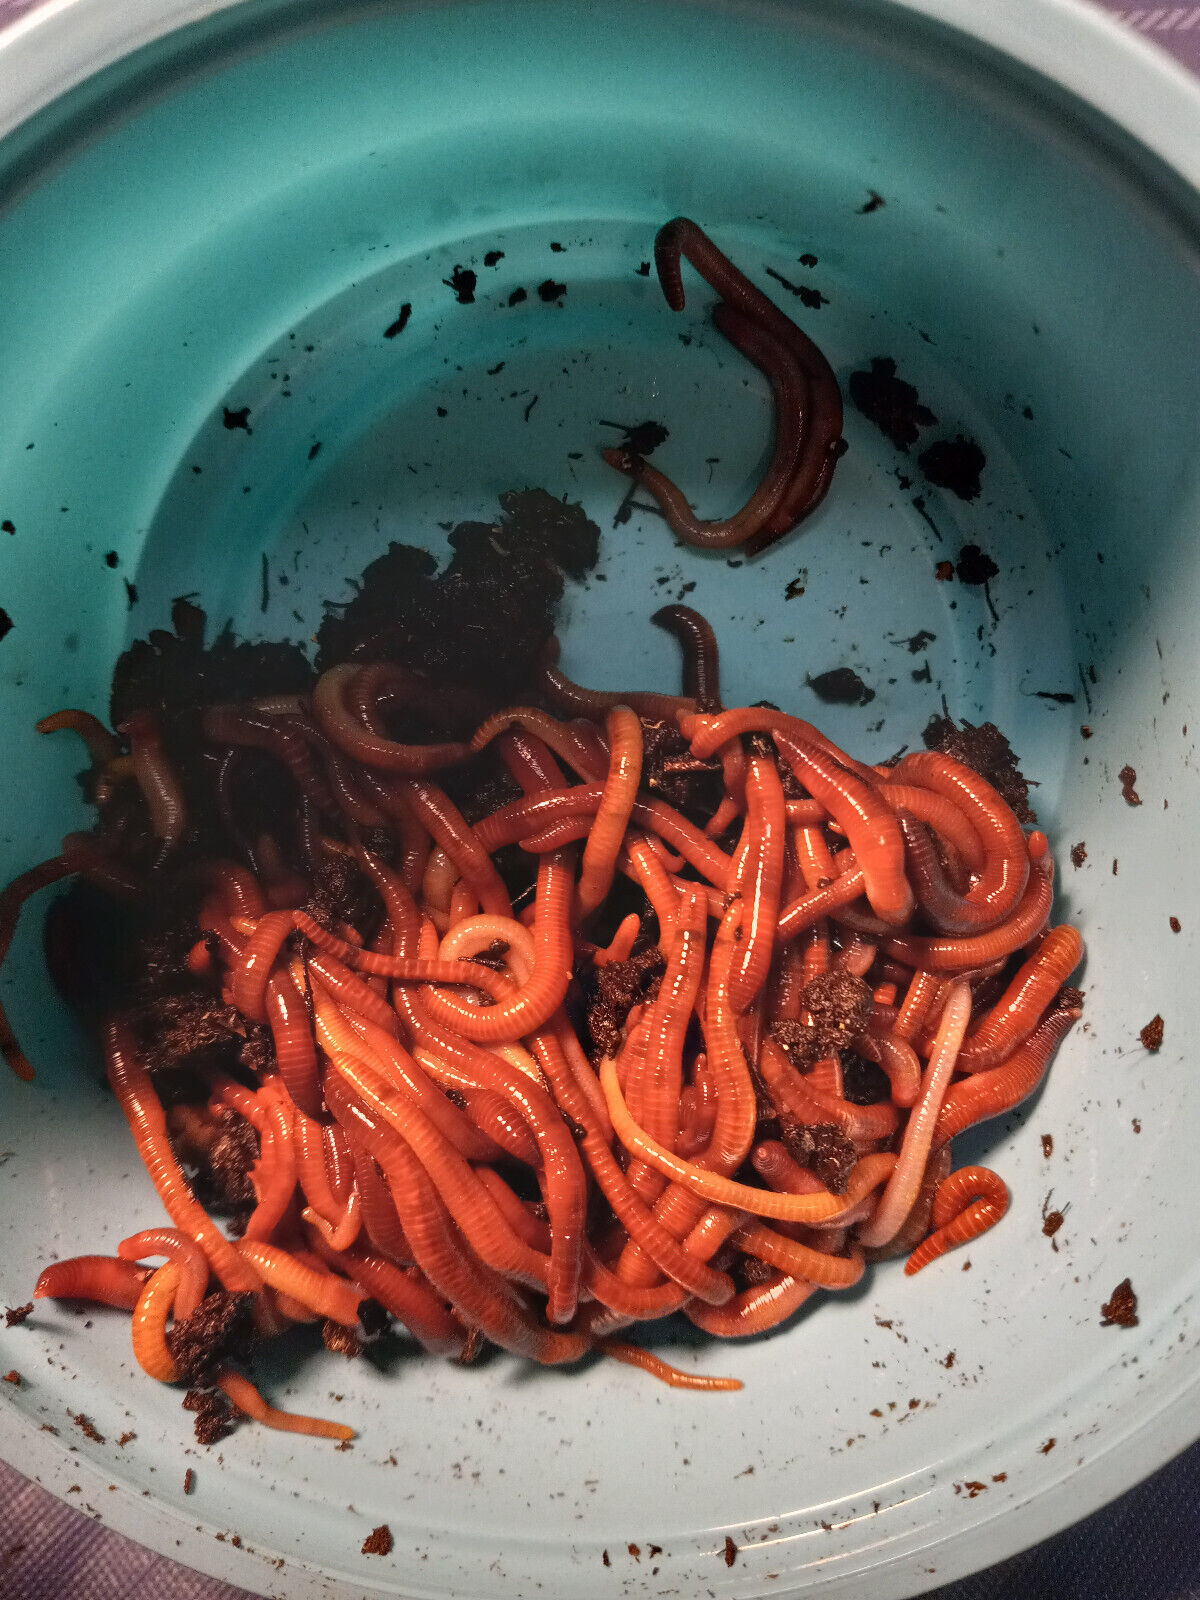 Live Red Wiggler WORMS, Garden Time, Red Wiggler Compost Worms, Red Wigglers